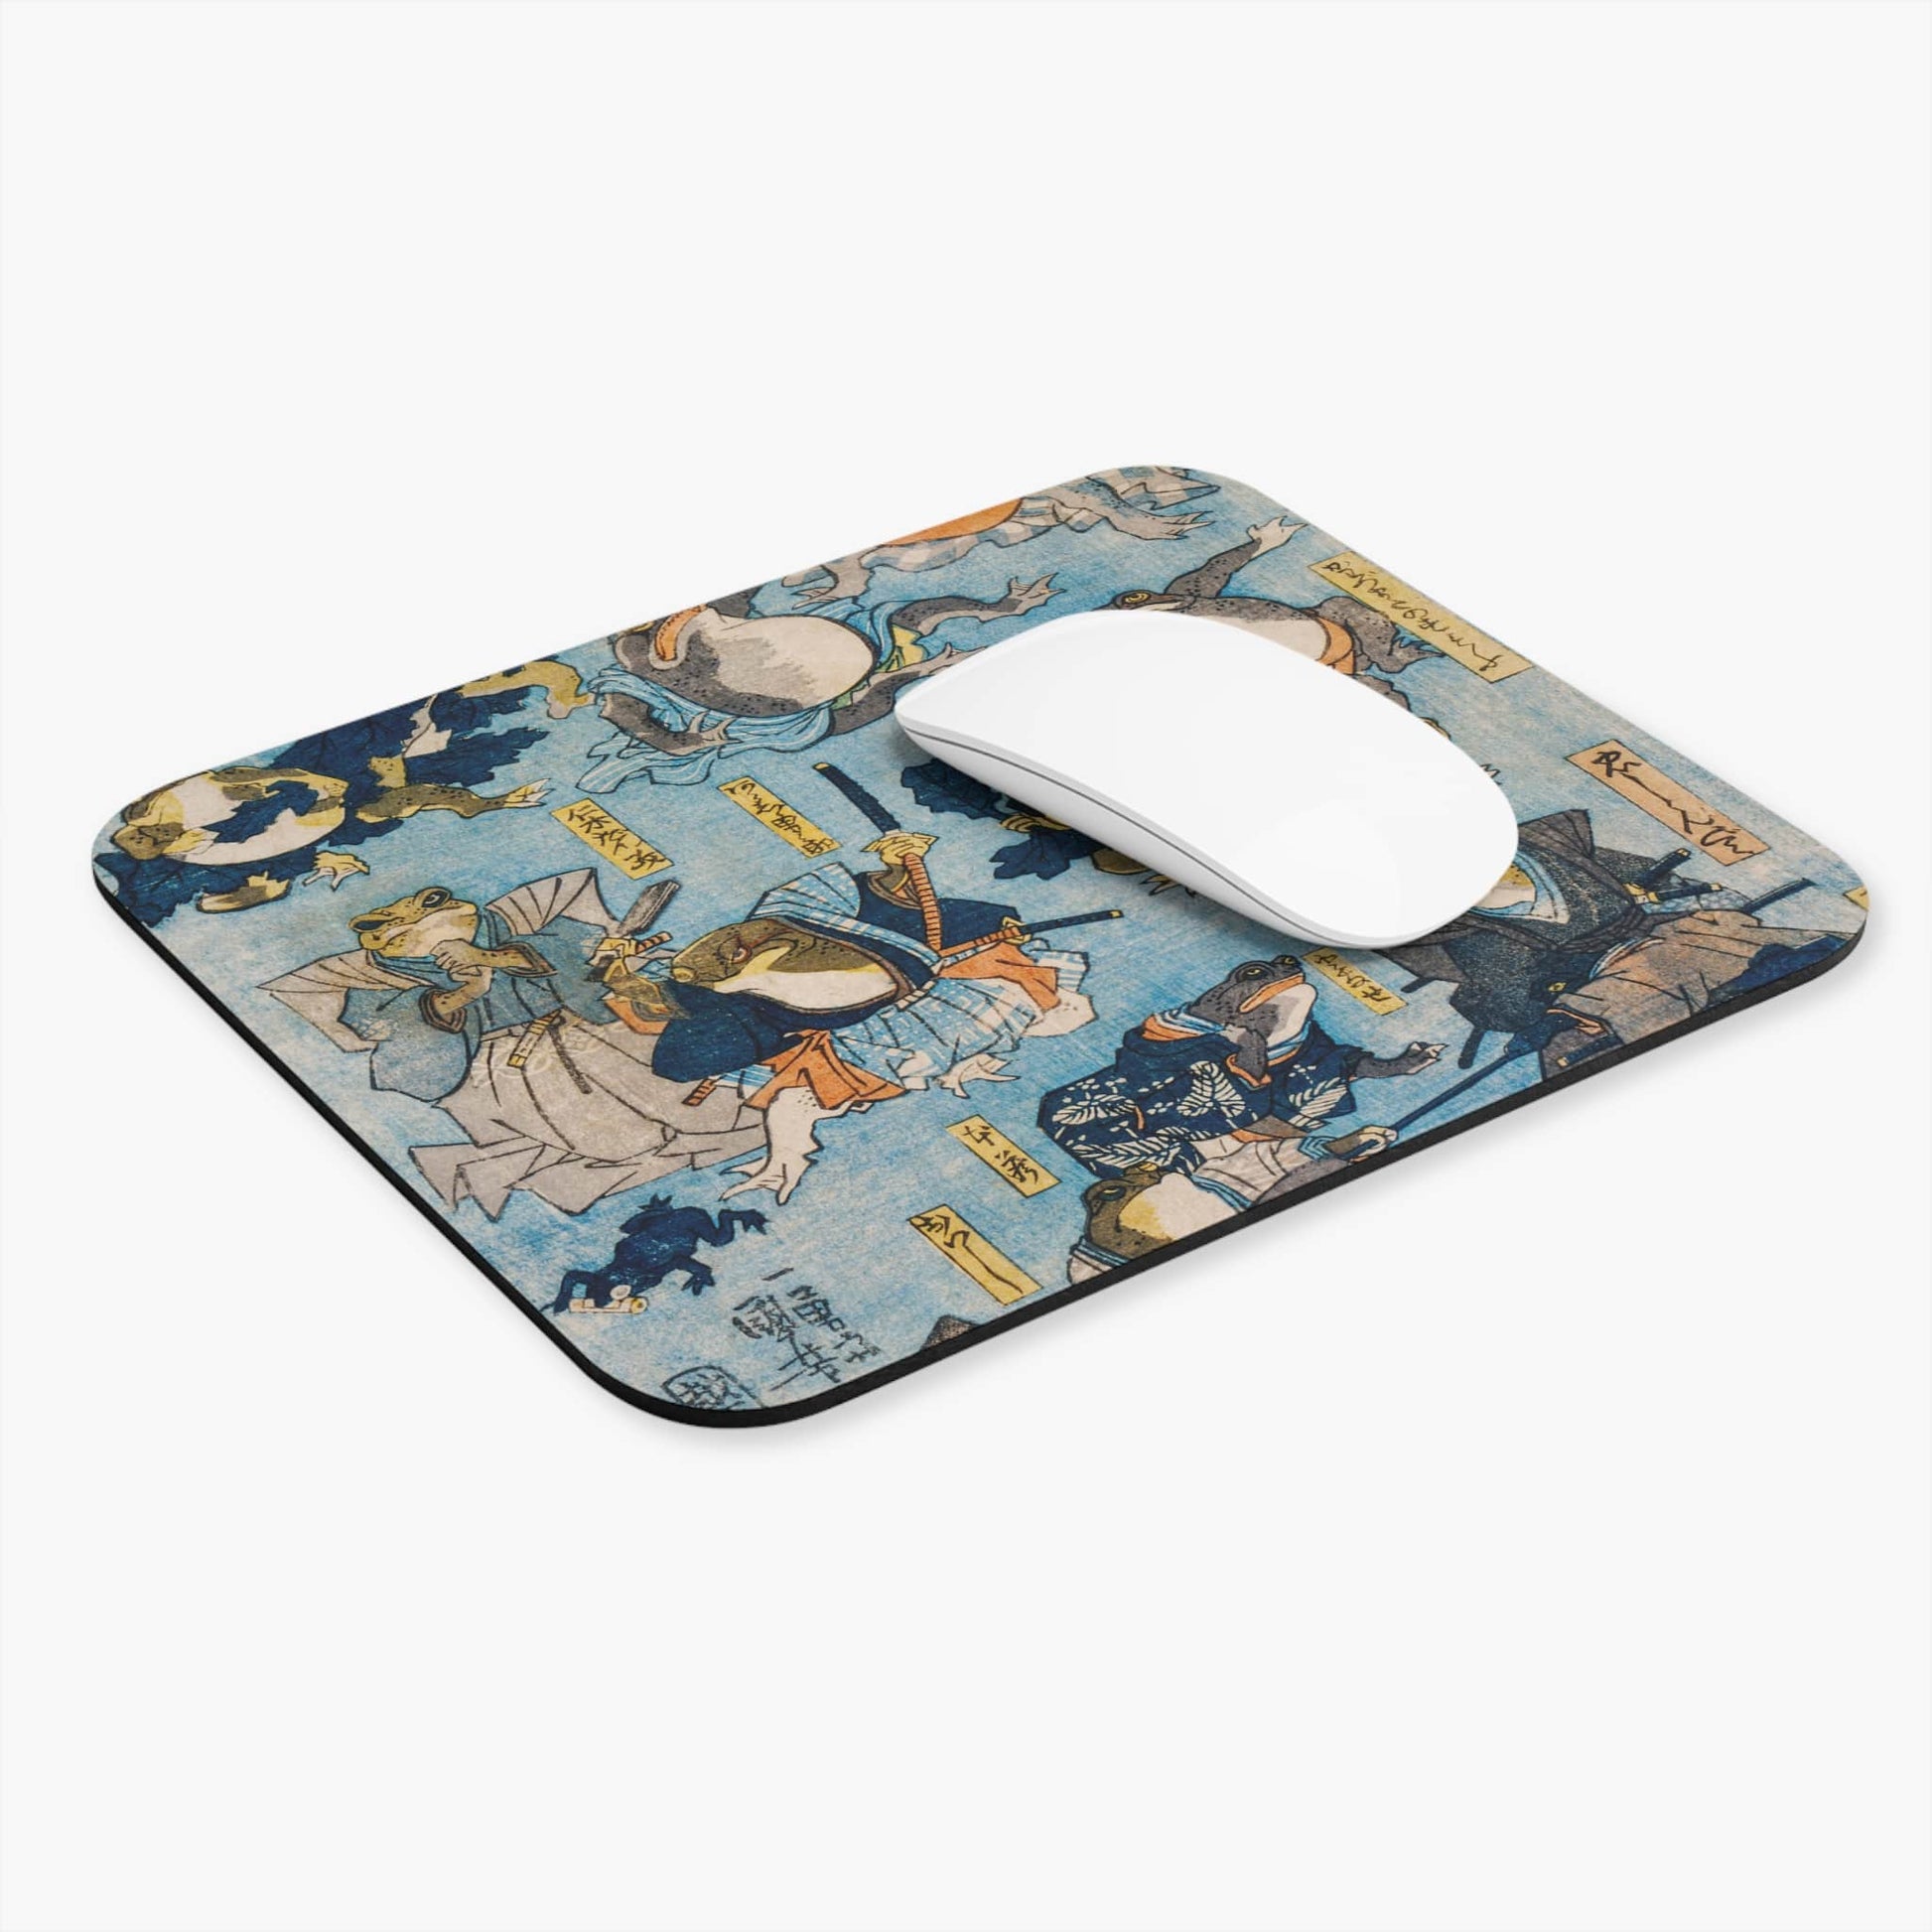 Samurai Frogs Computer Desk Mouse Pad With White Mouse